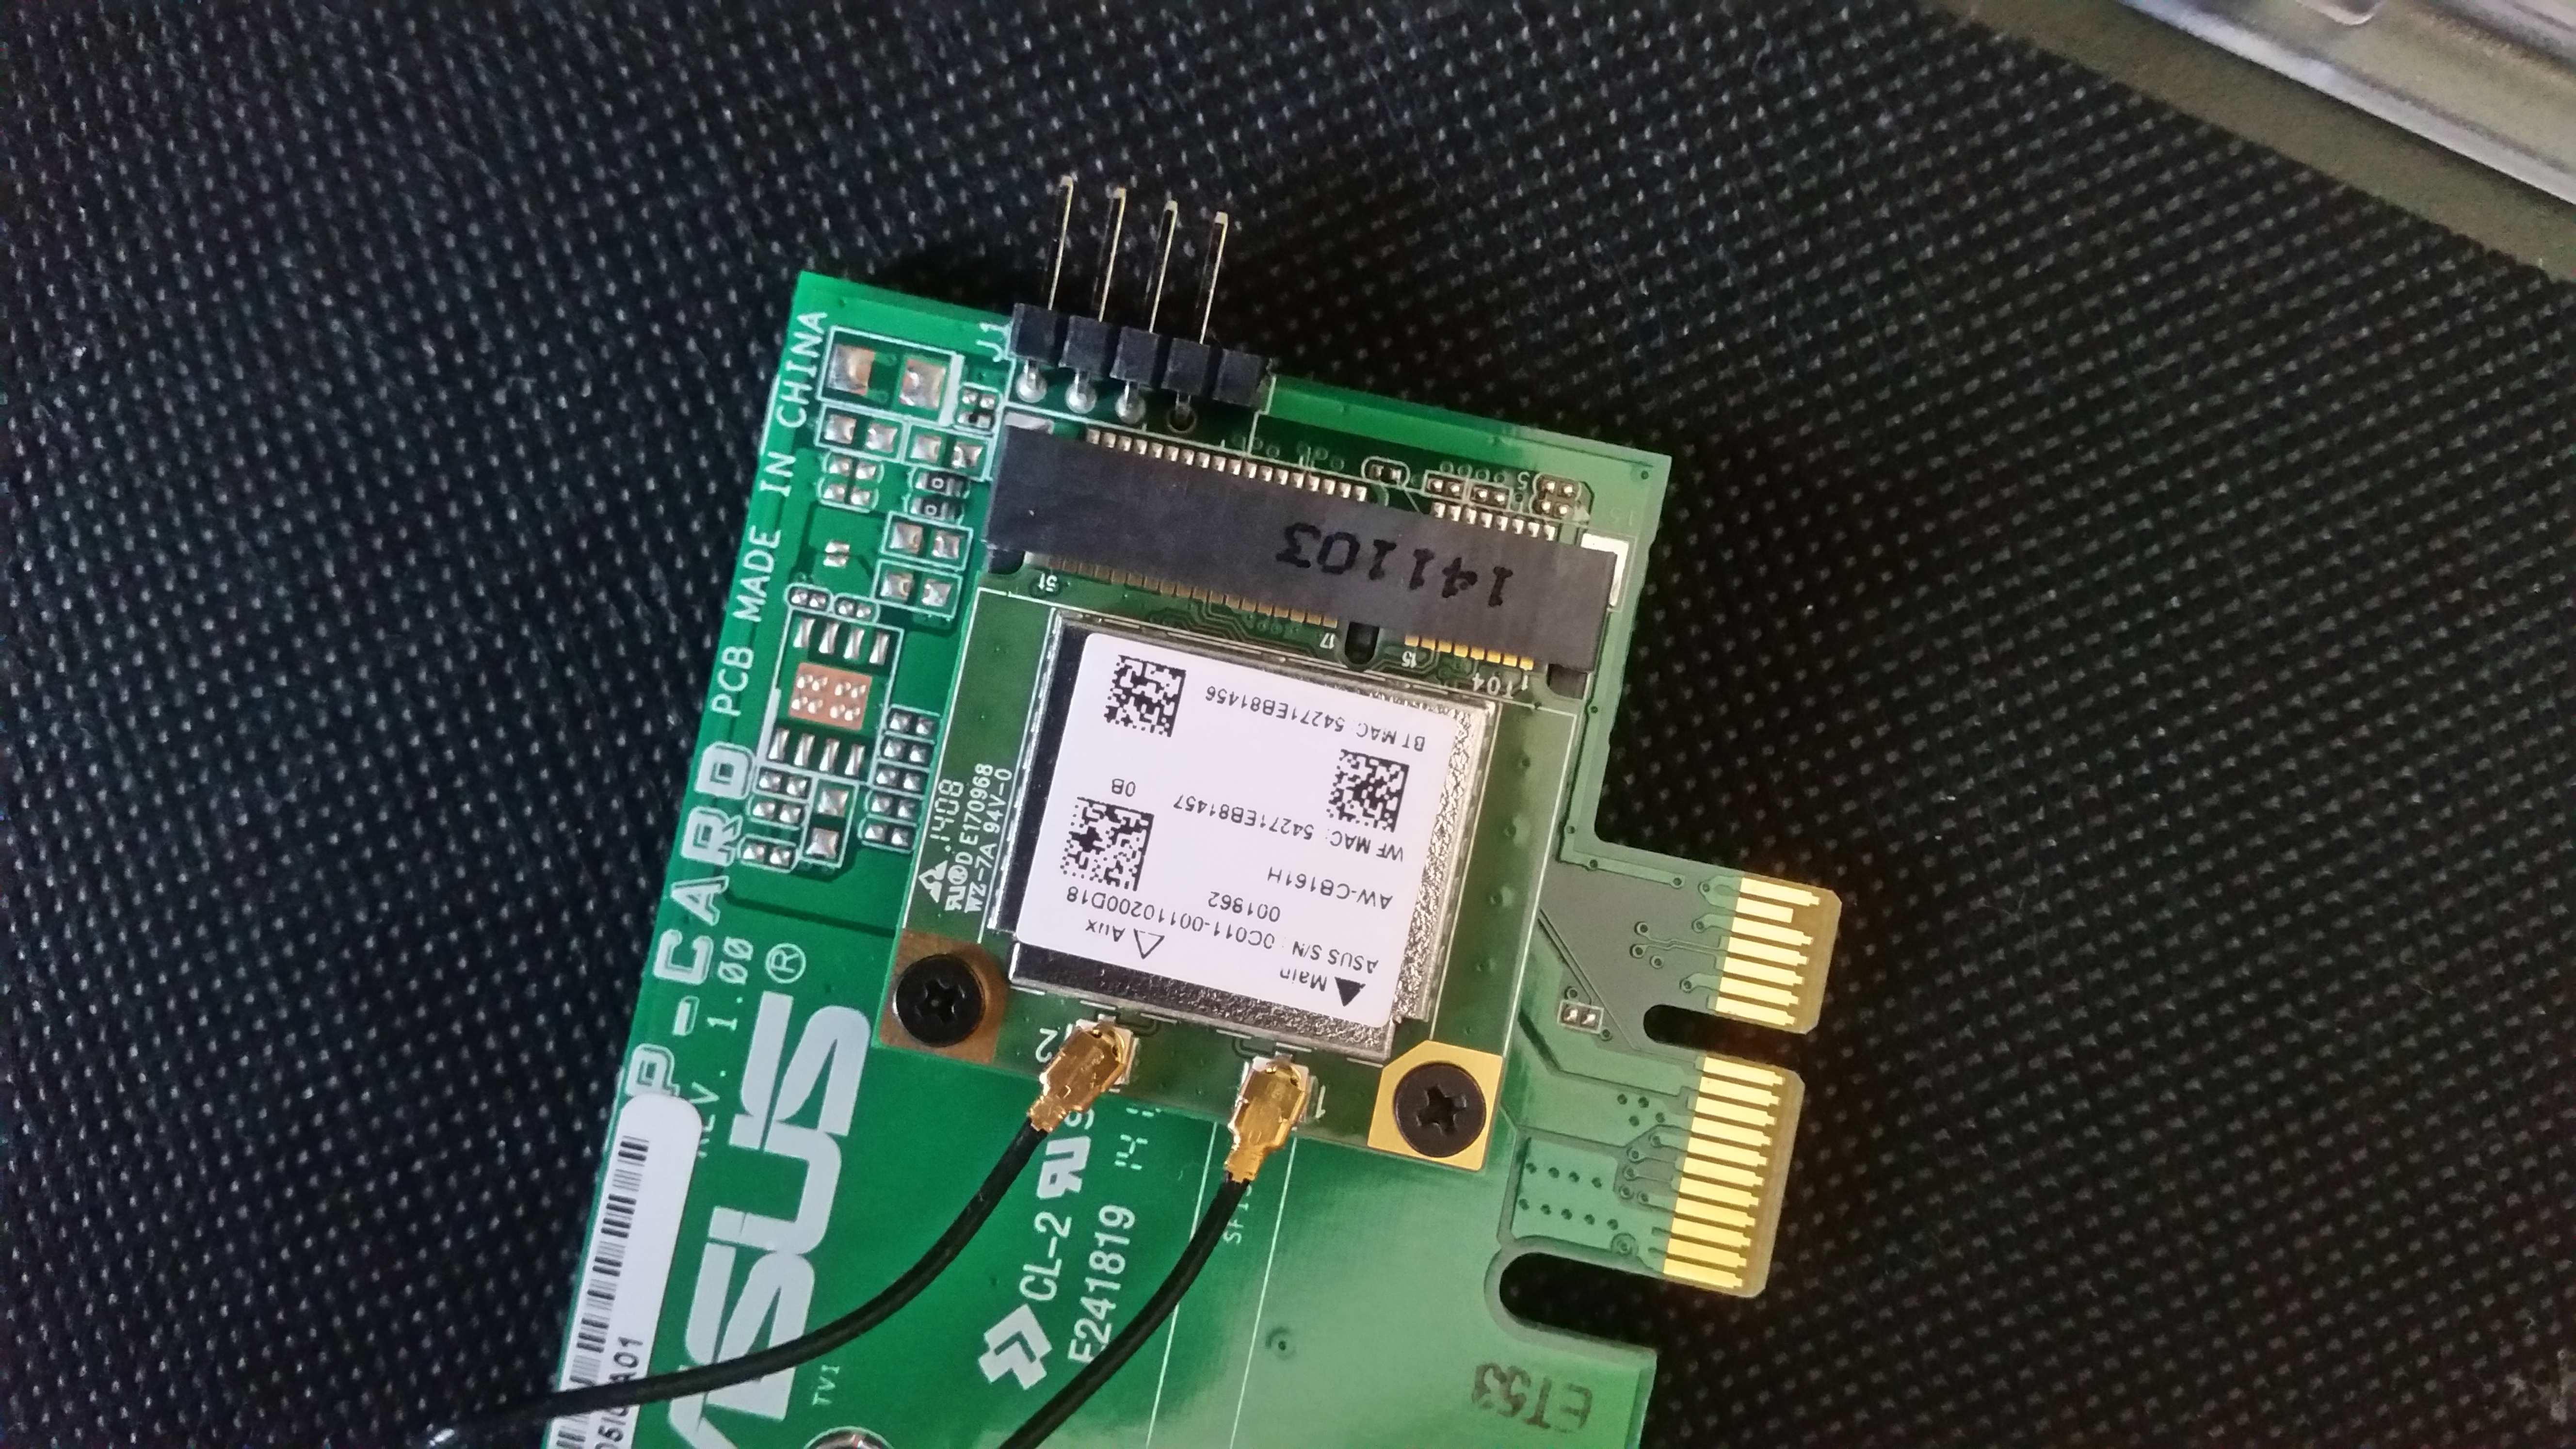 Pcie wifi/Bluetooth card weird 4pin connector - Networking ...